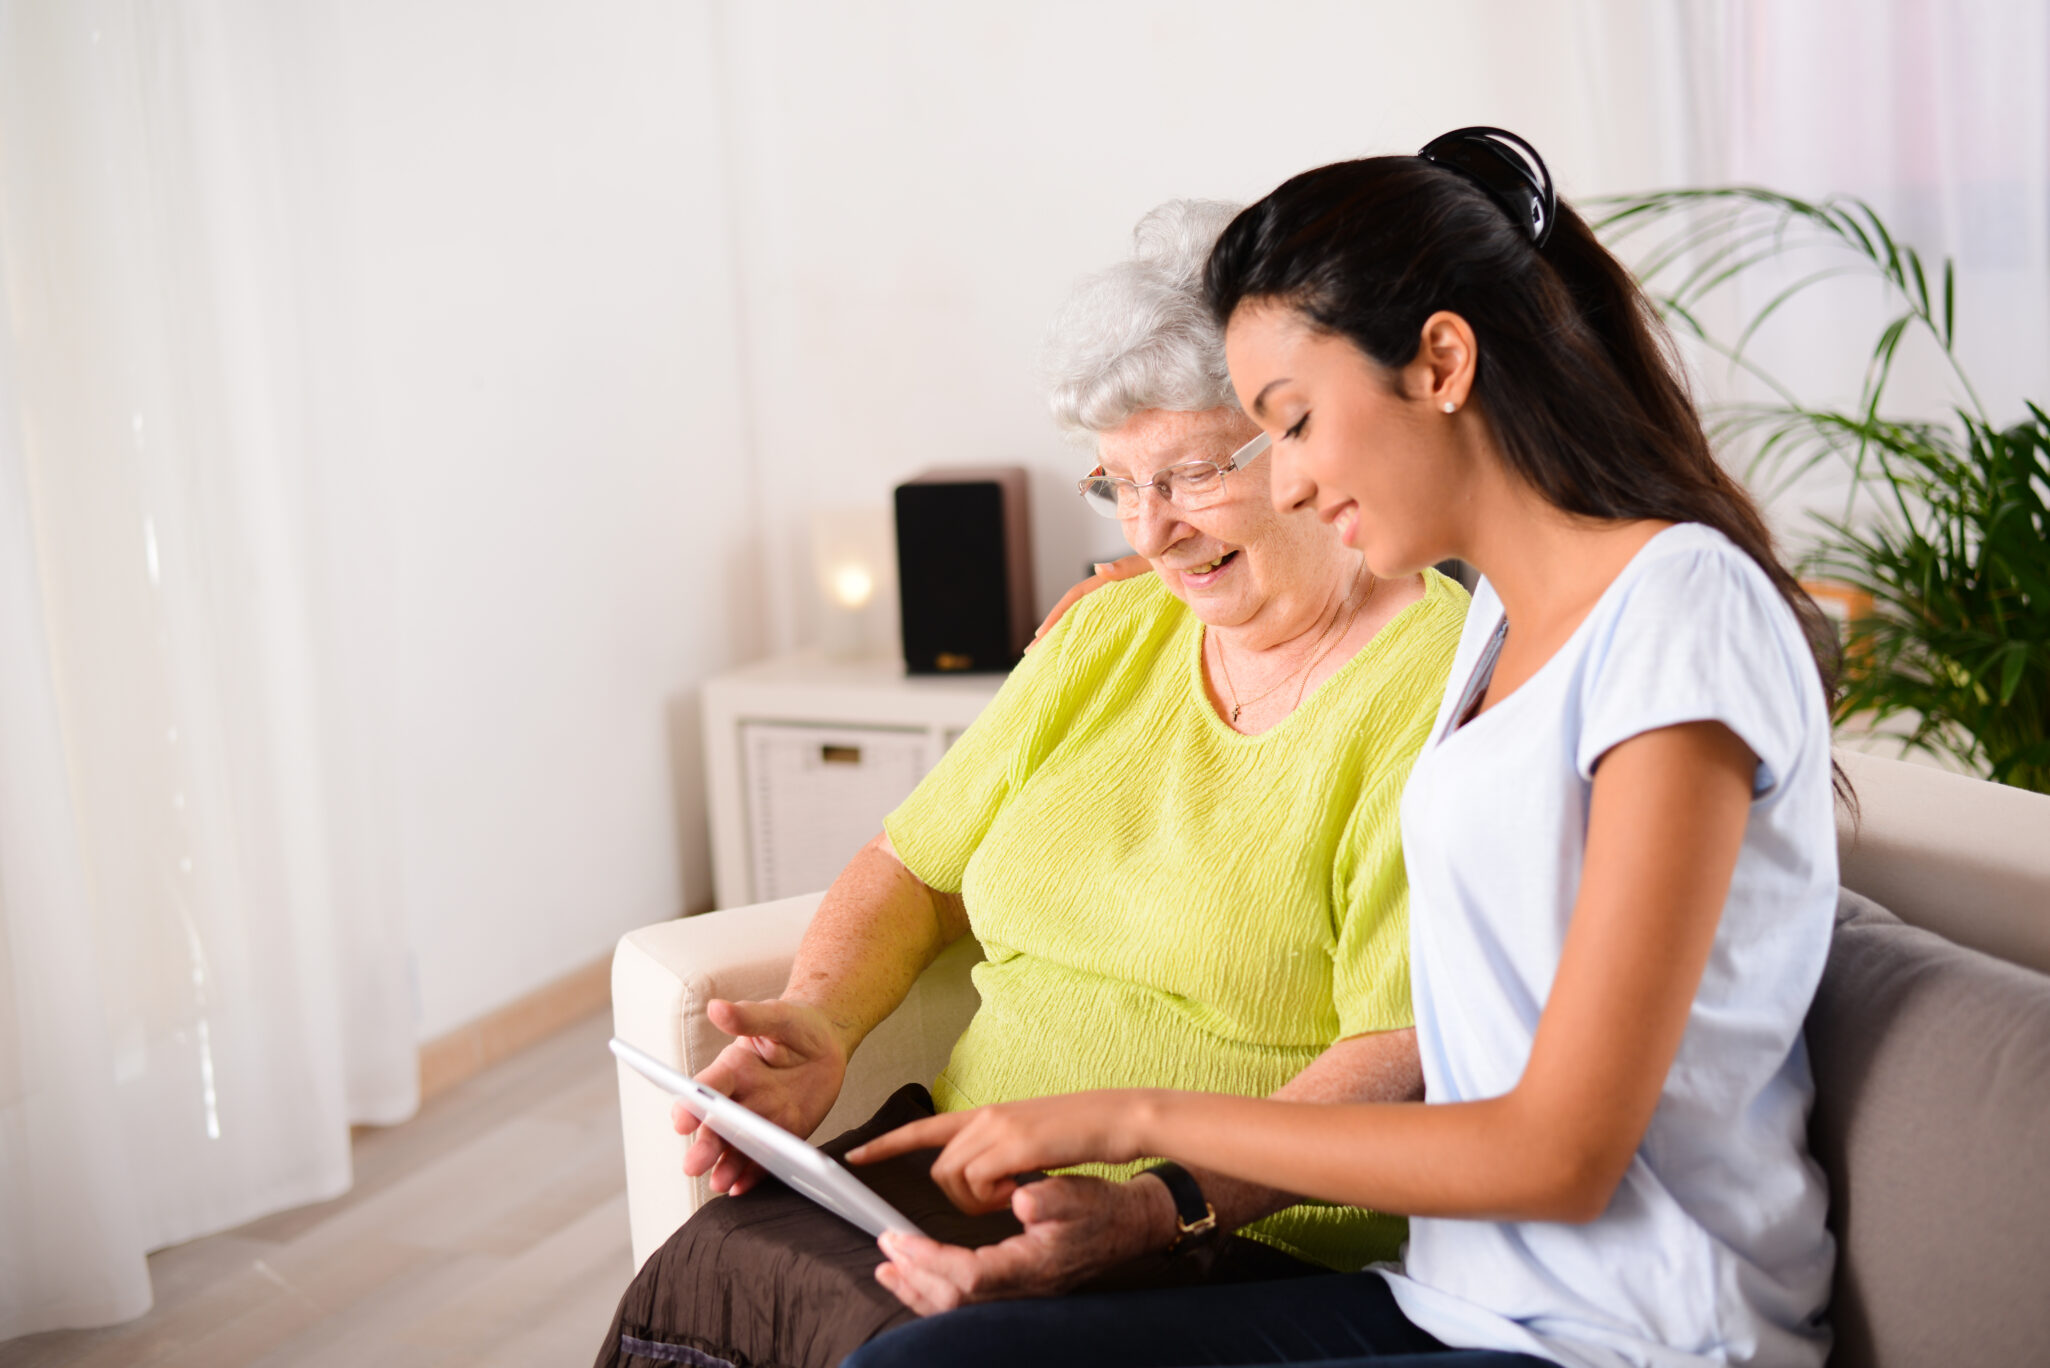 A health care worker sits next to an older woman and points out things on an tablet